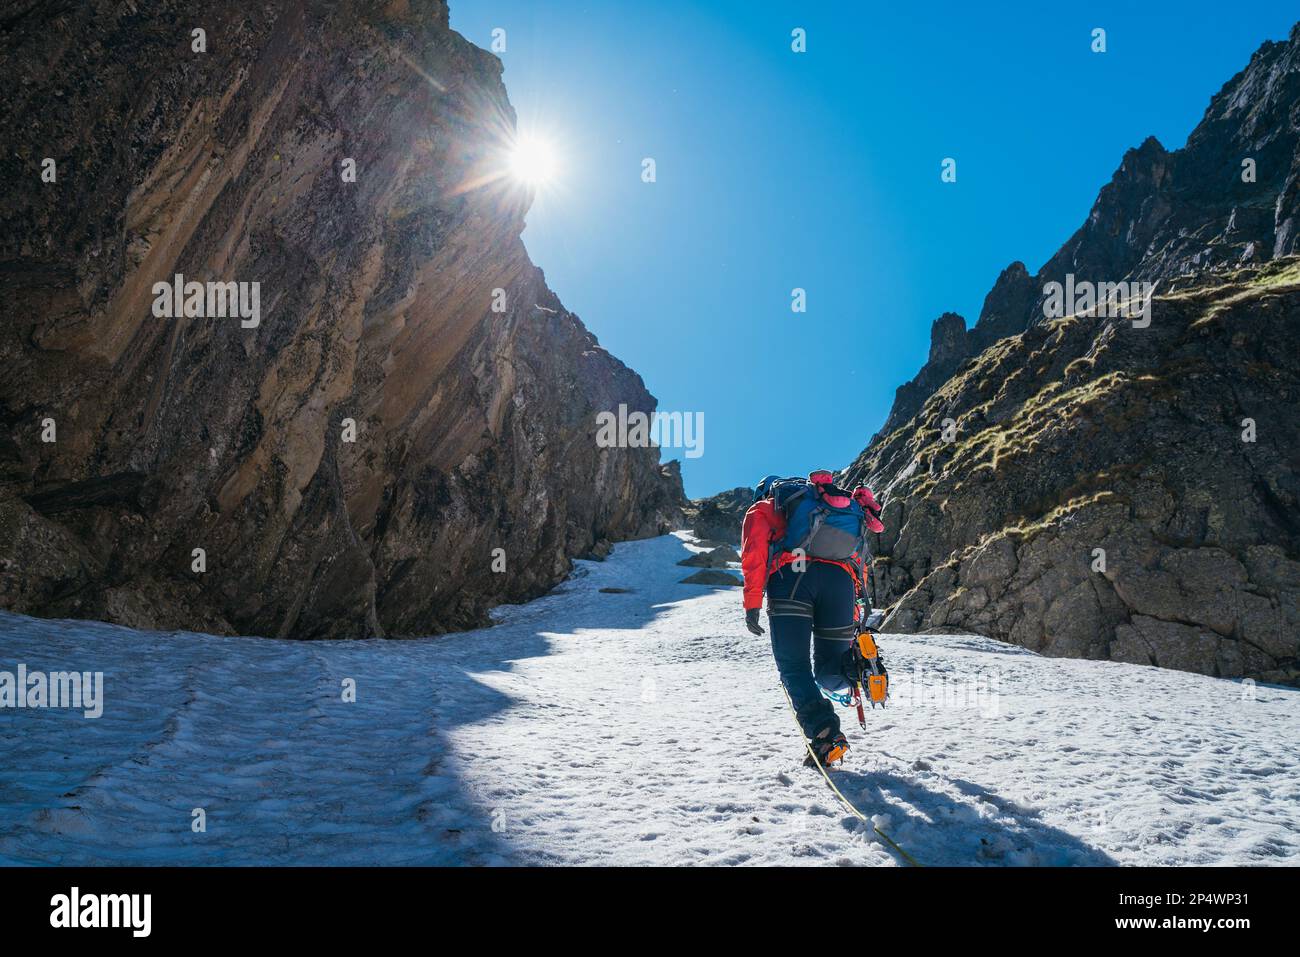 Team roping up woman dressed high altitude mountaineering clothes and harness climbing with backpack by snowy slope in the couloir with backlight sun Stock Photo